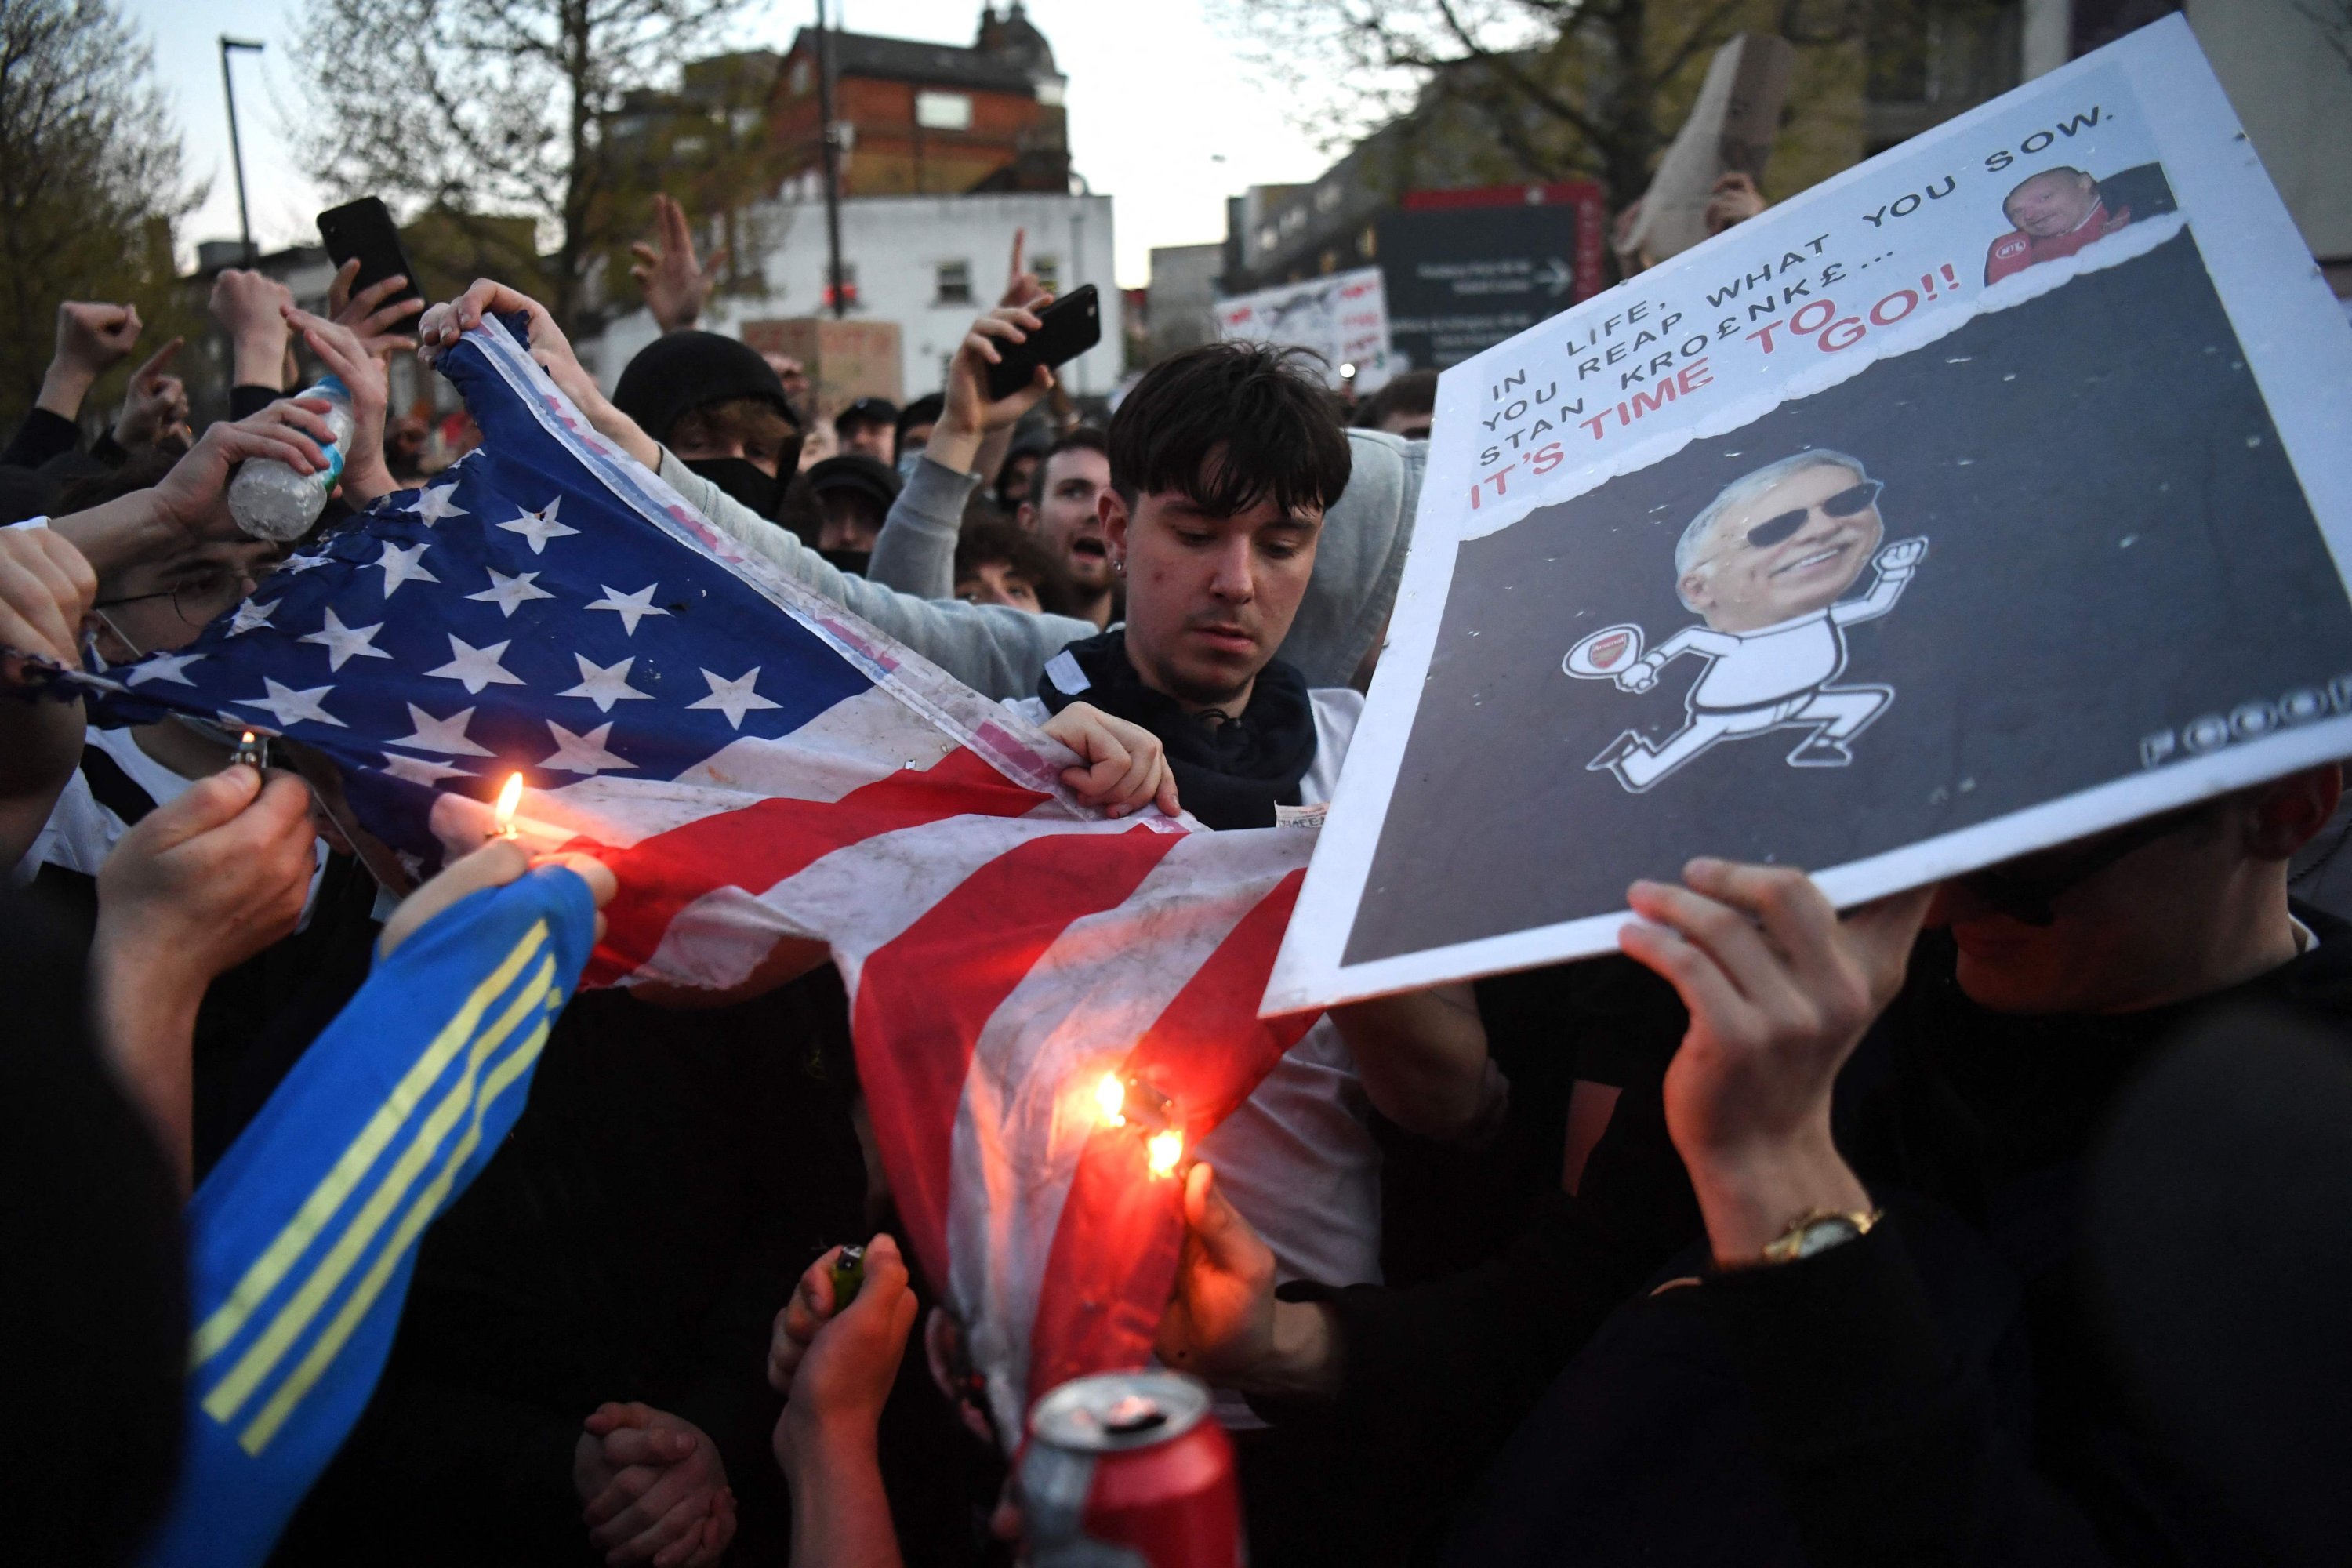 Supporters try to set alight a U.S. flag as they protest against Arsenal's U.S. owner Stan Kroenke ahead of their game against Everton, outside English Premier League club Arsenal's Emirates stadium in London, Britain, April 23, 2021. (AFP)